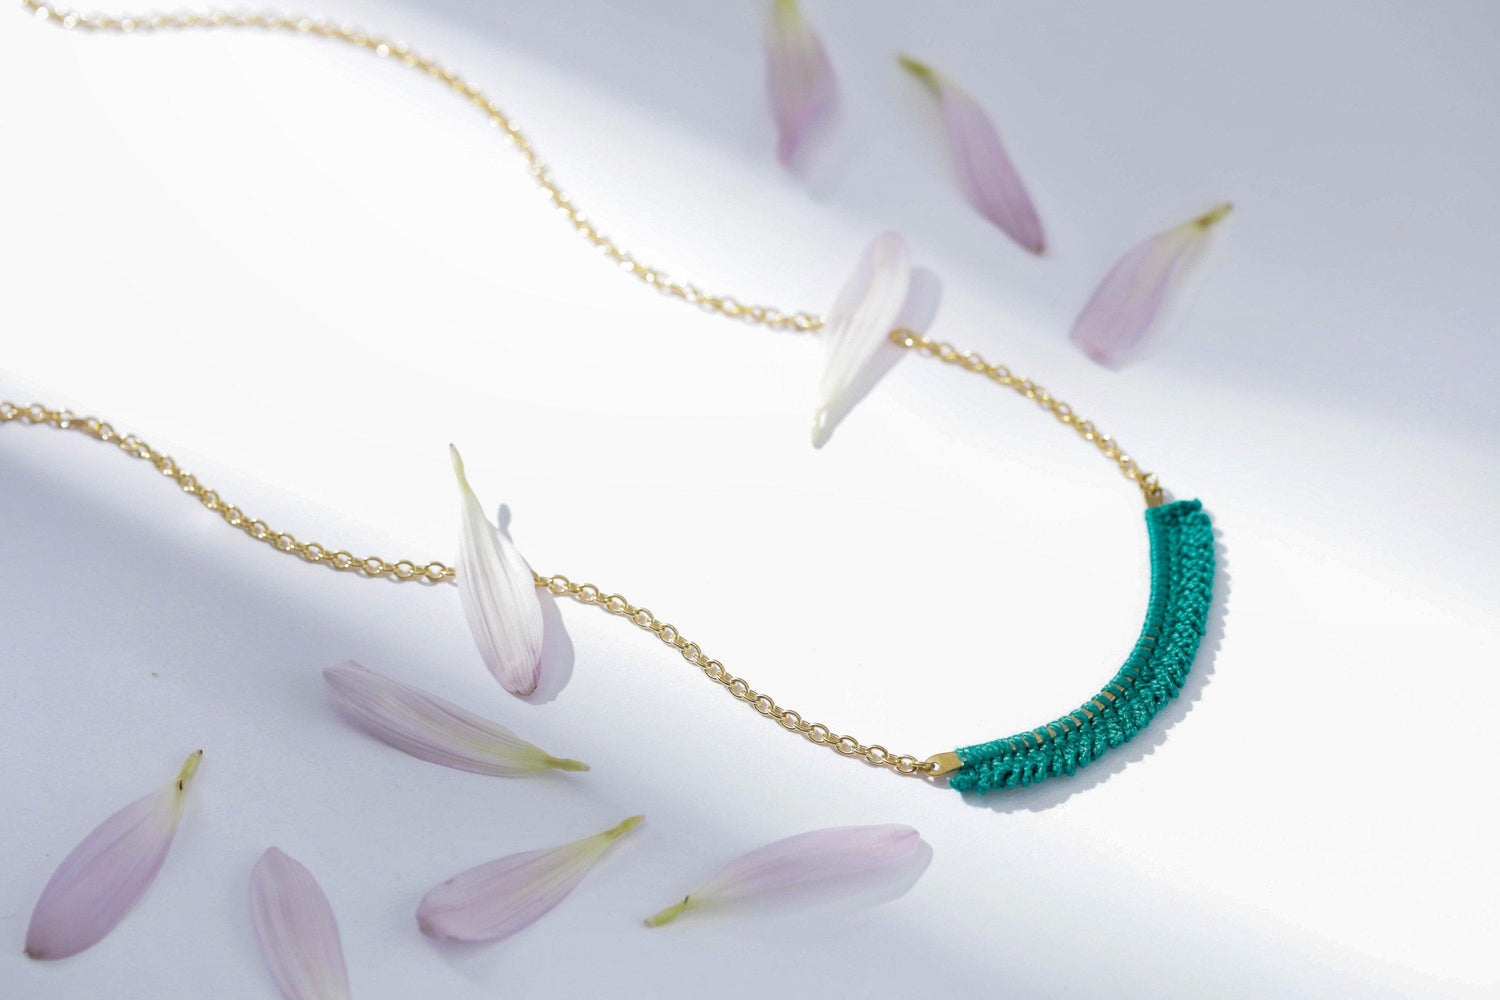 The Beautiful Meanings Behind the Color Turquoise